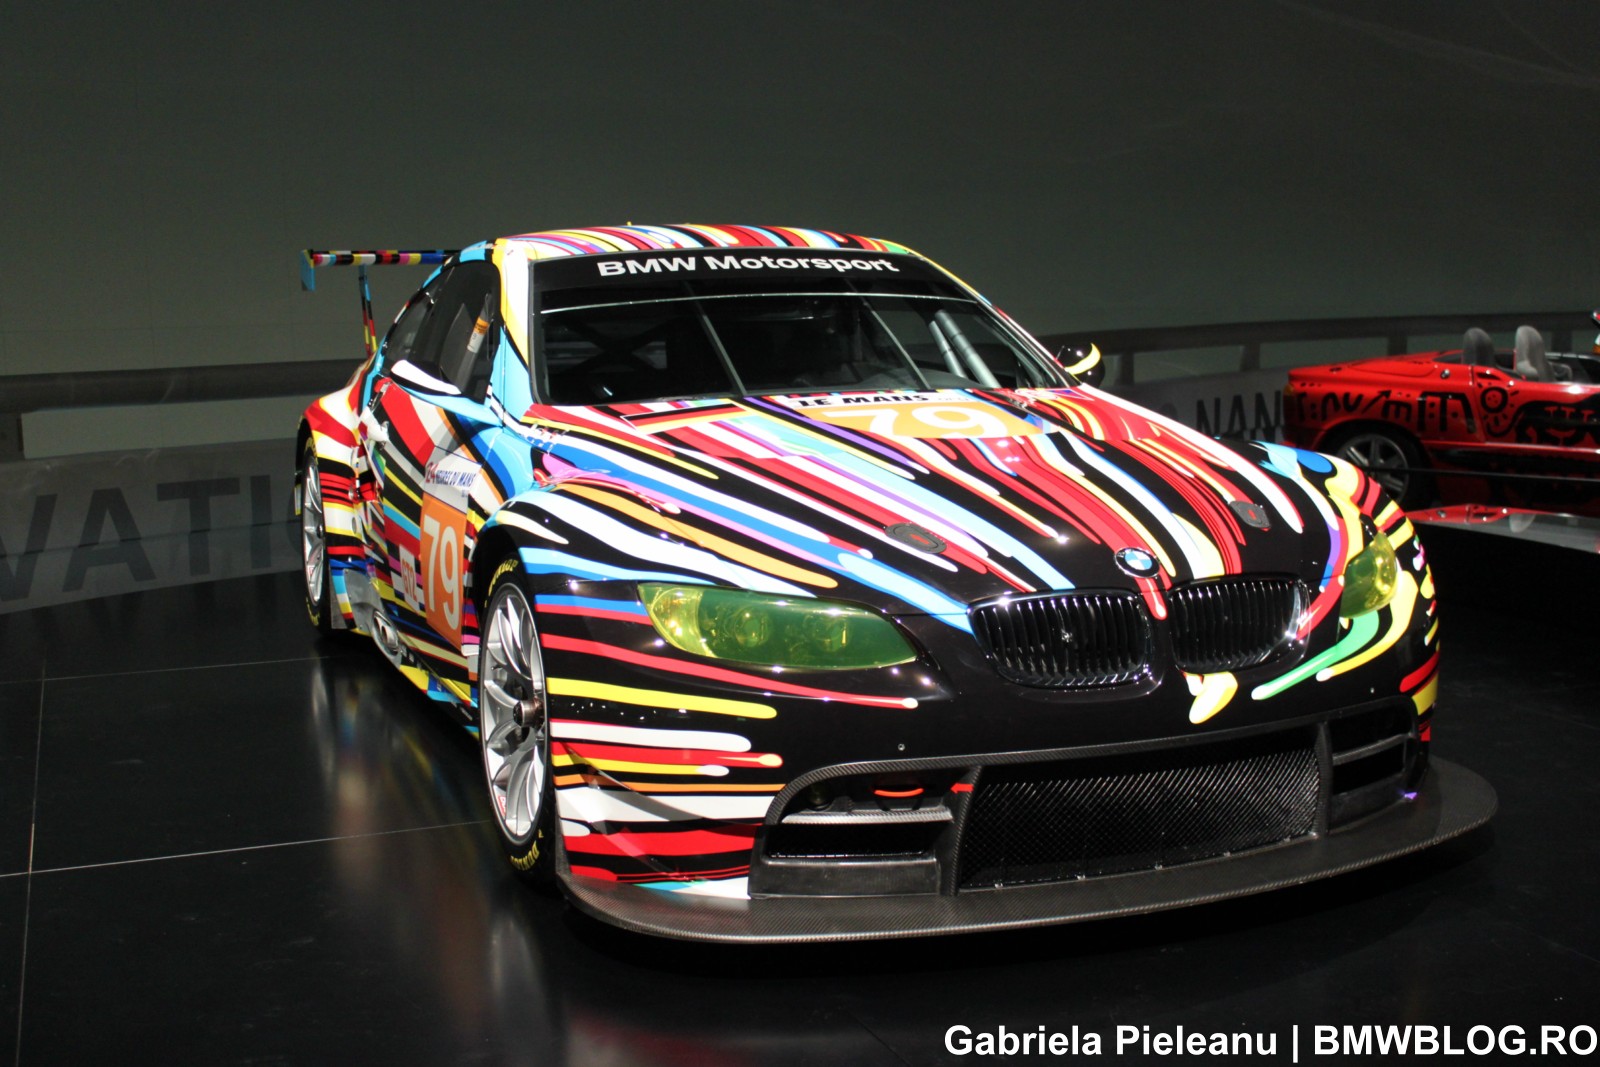 BMW M3 GT2 Art Car at the BMW Museum